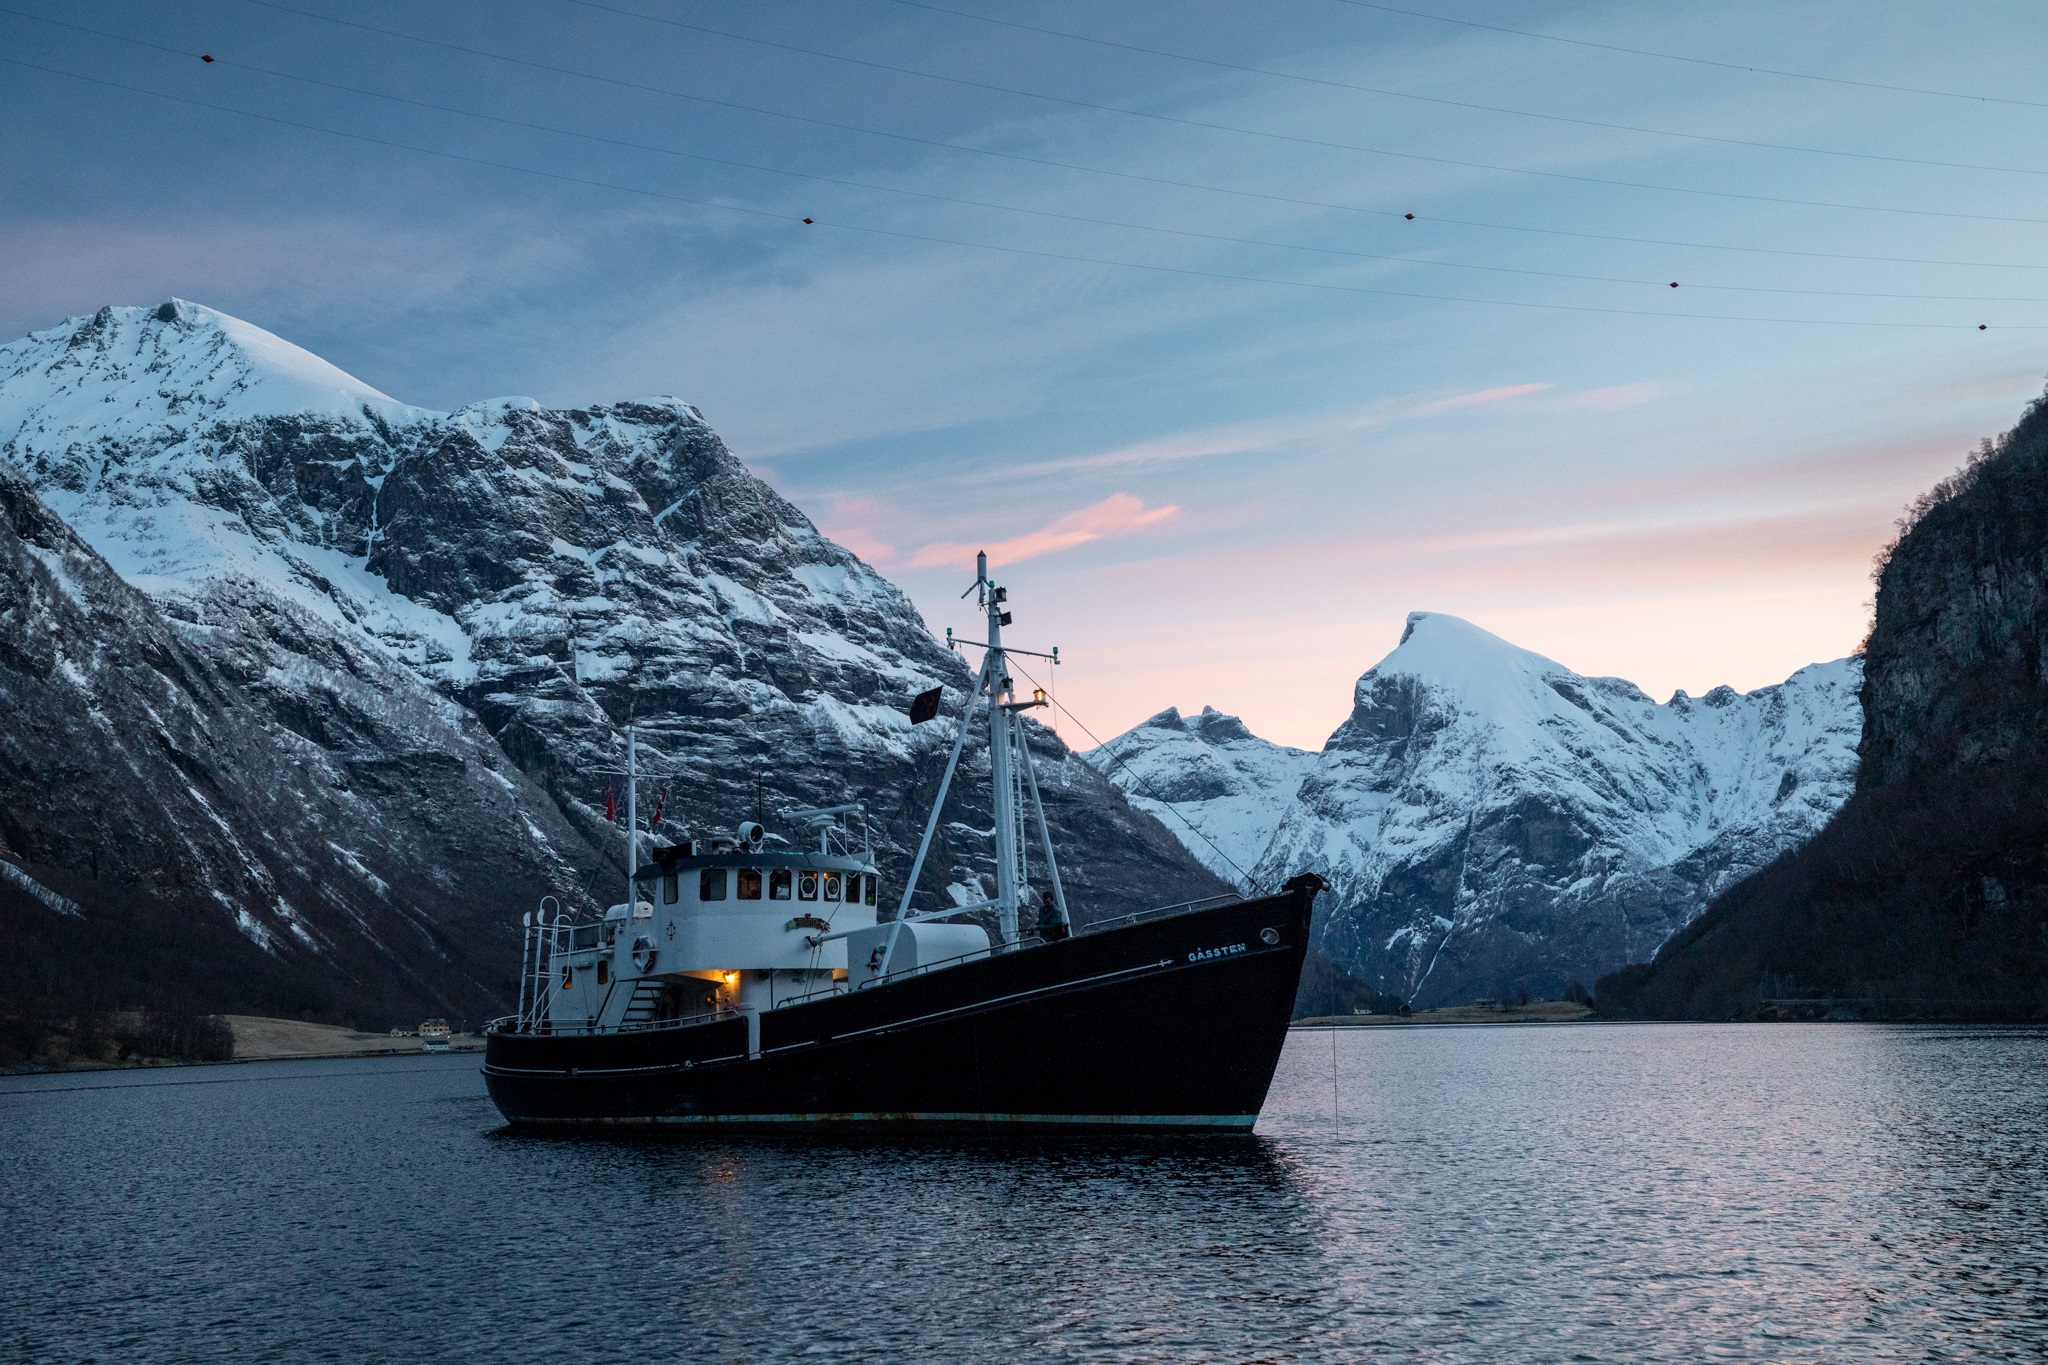 HMS Gassten boat floats in a Norwegian fjord with snowy mountains behind